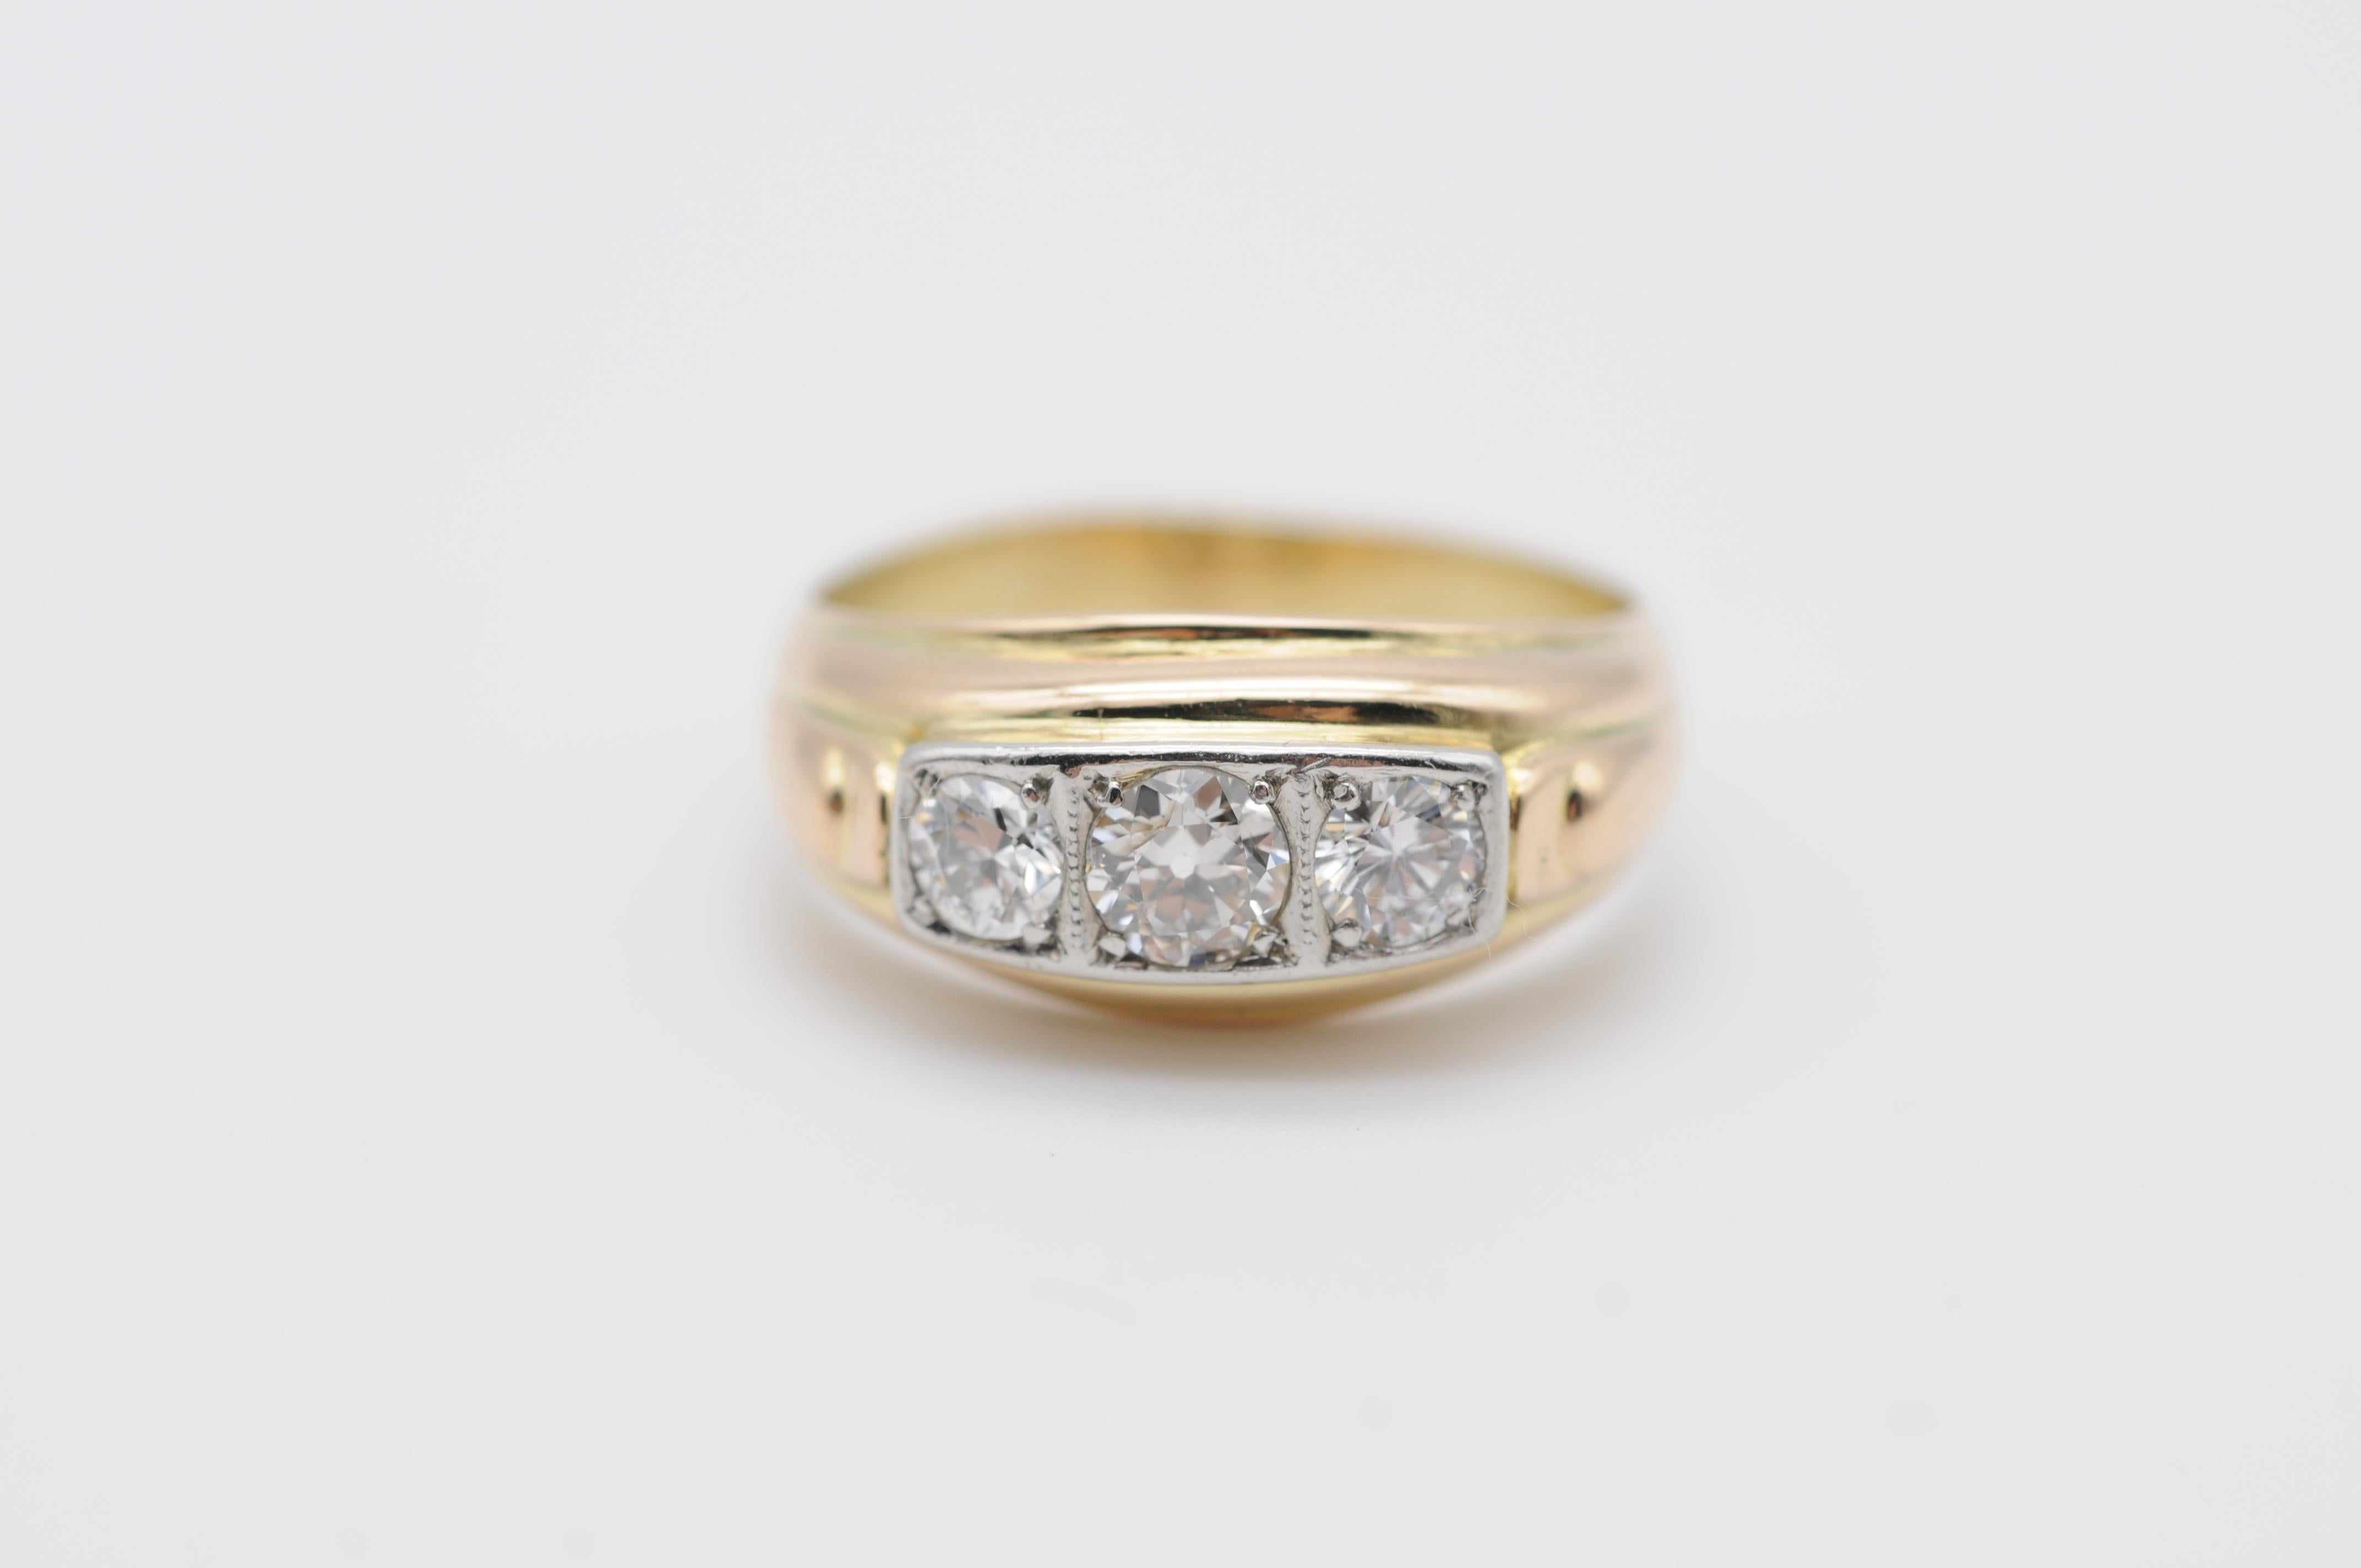 Indulge in the luxurious beauty of this classic diamond ring, meticulously crafted from 14k yellow gold. Featuring three stunning diamonds with a total carat weight of approximately 0.70 carats, this ring exudes elegance and refinement. The diamonds